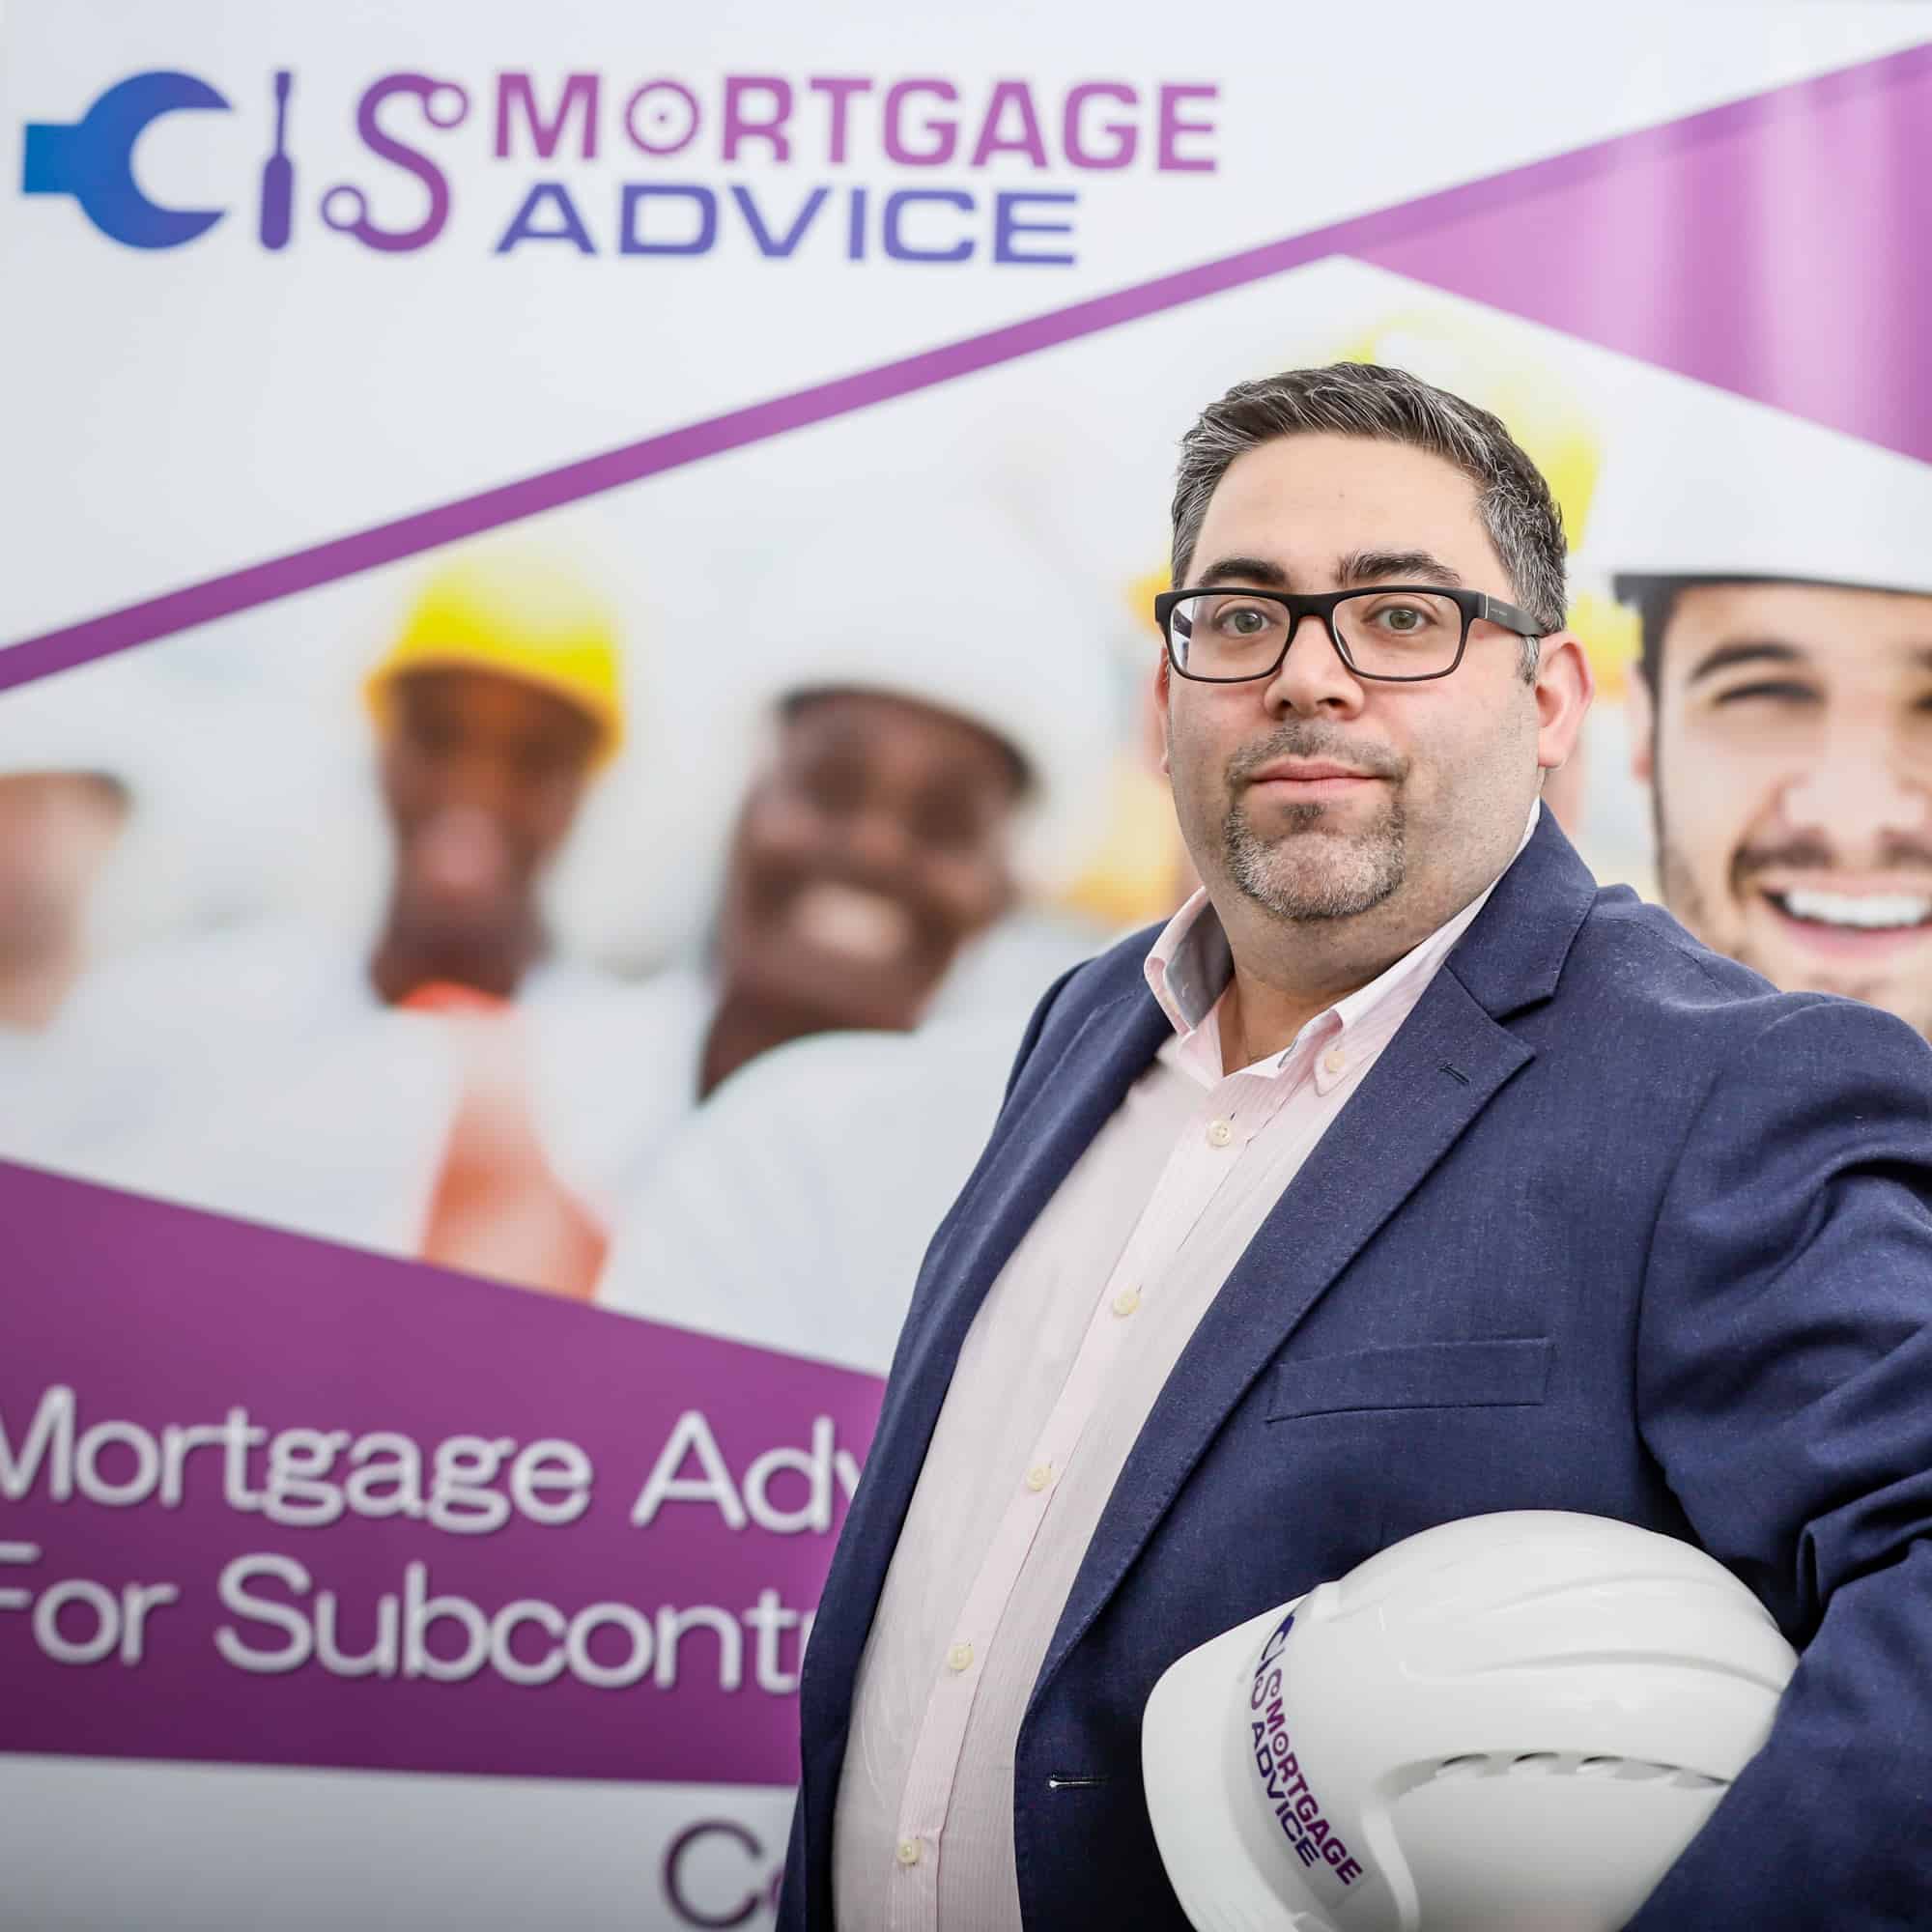 Cis Mortgage Advice, Expert Mortgage Advice for CIS Subcontractors